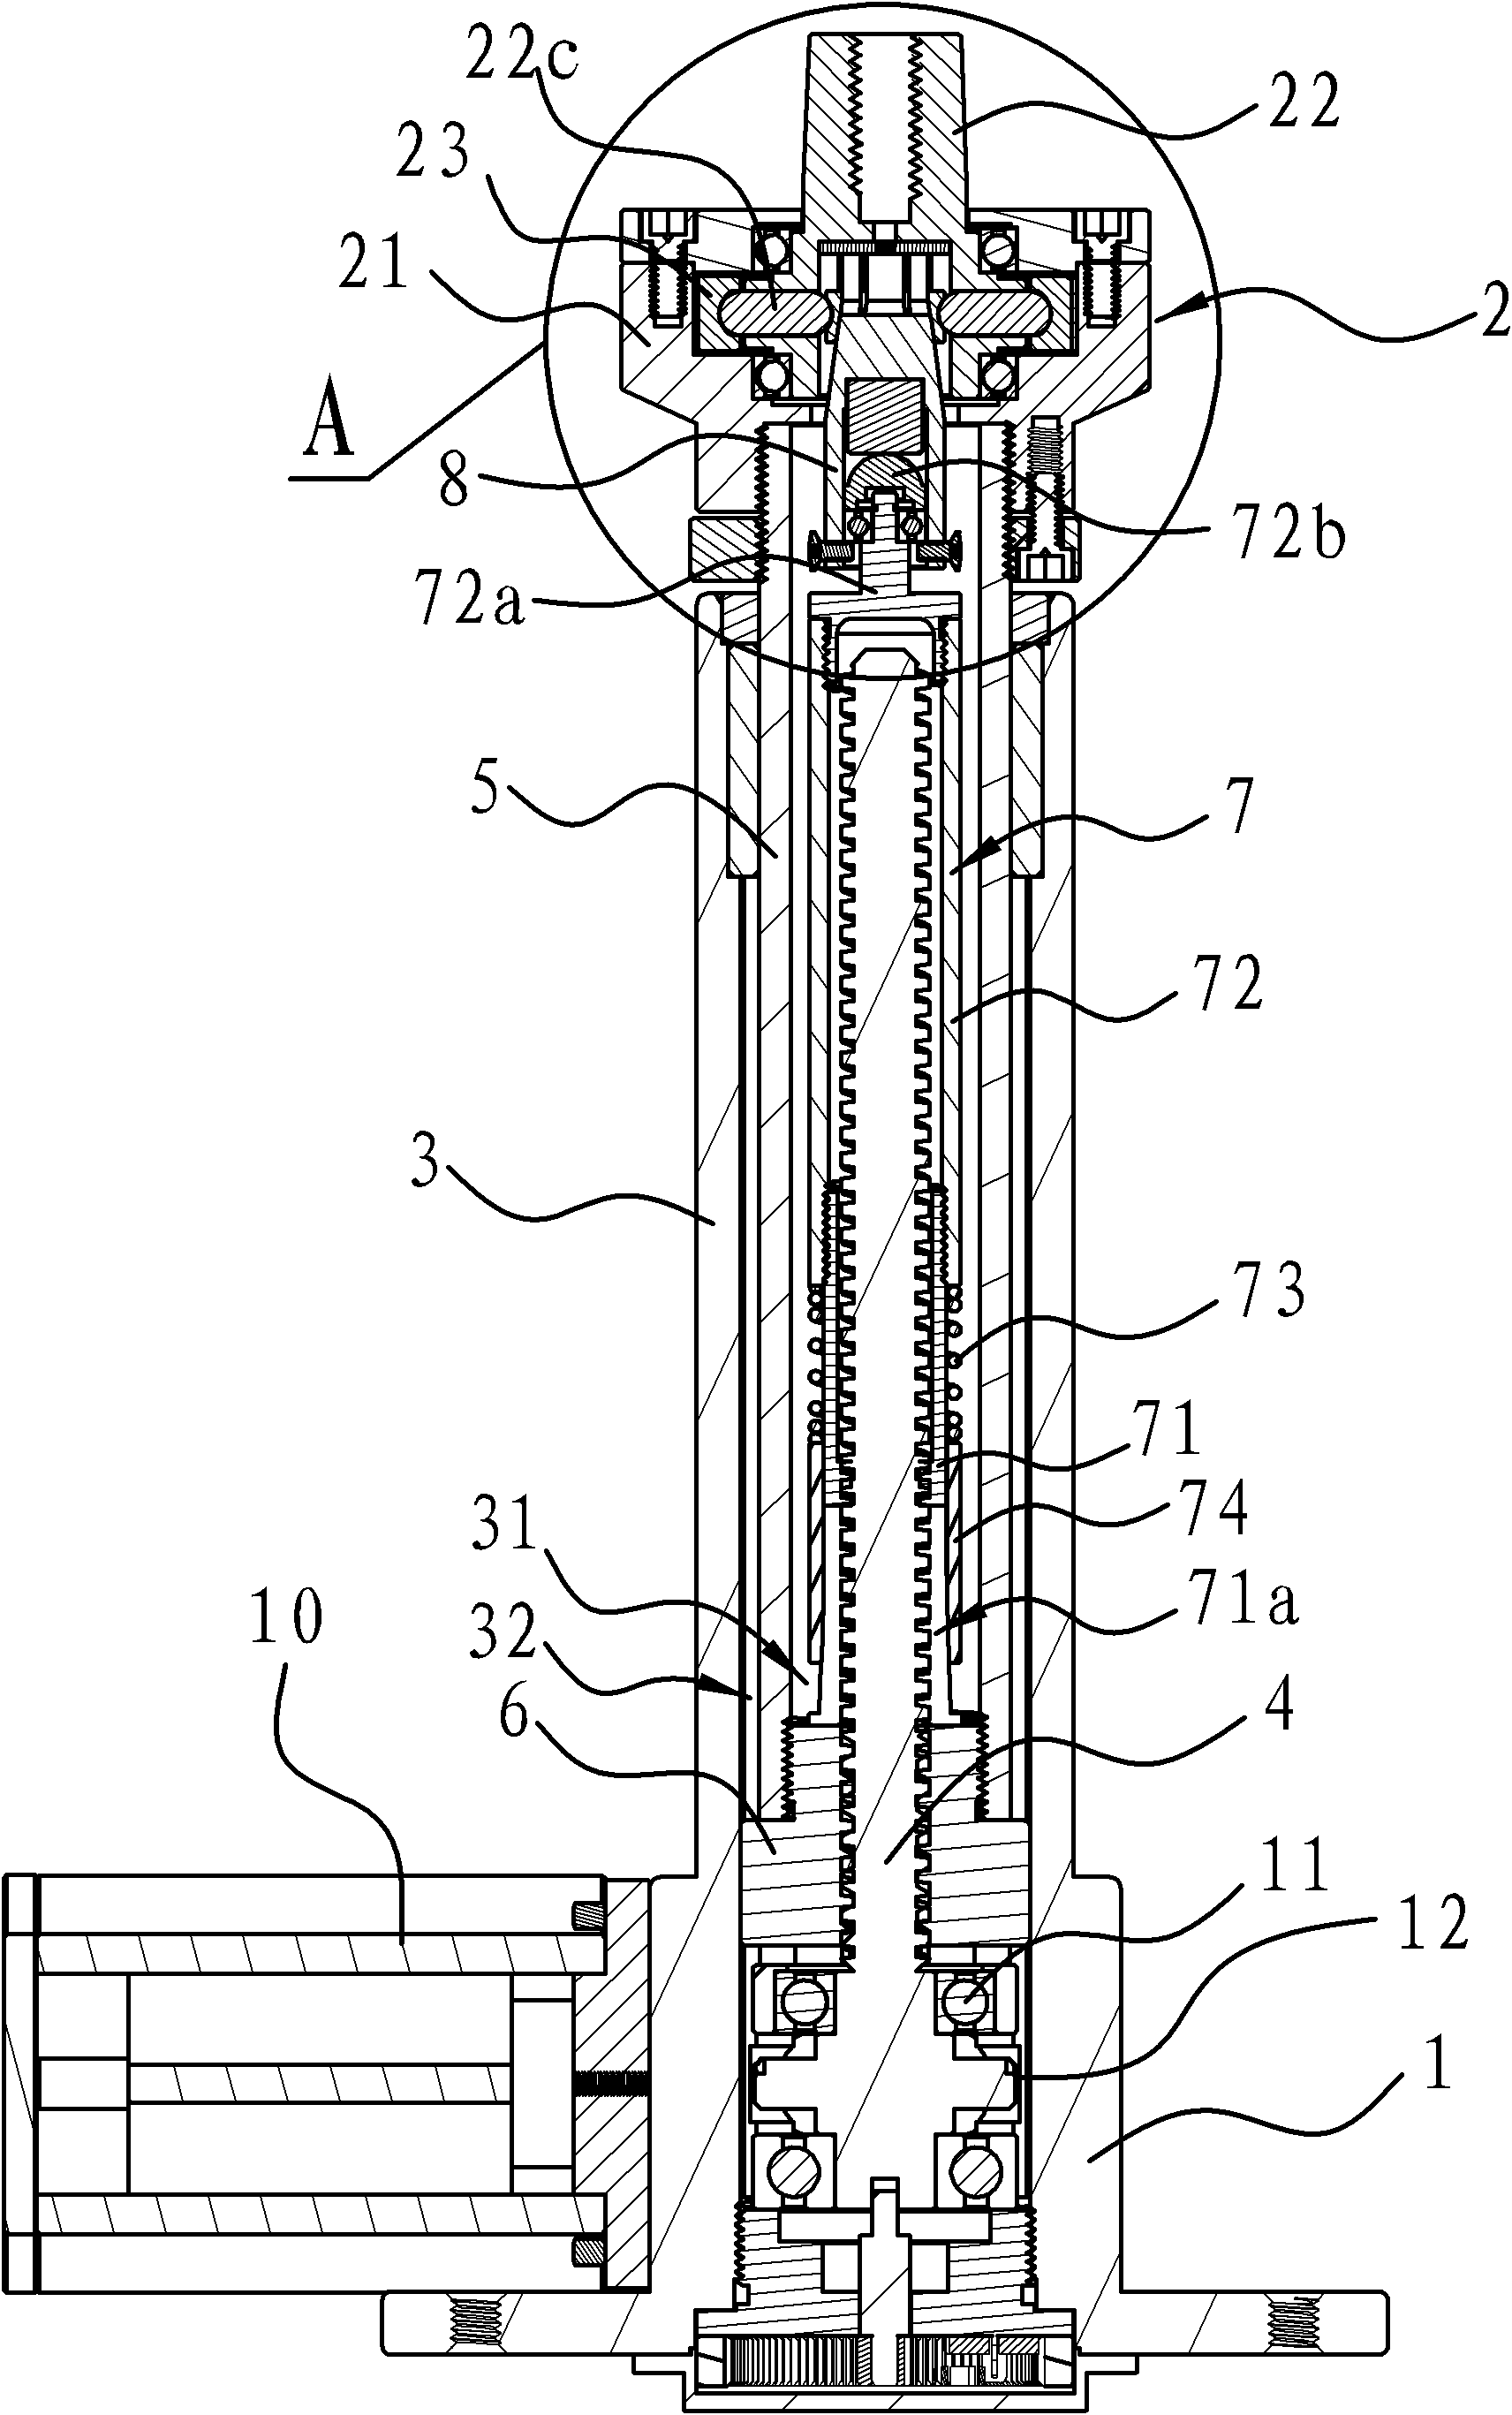 Electrical lifting device with locking function